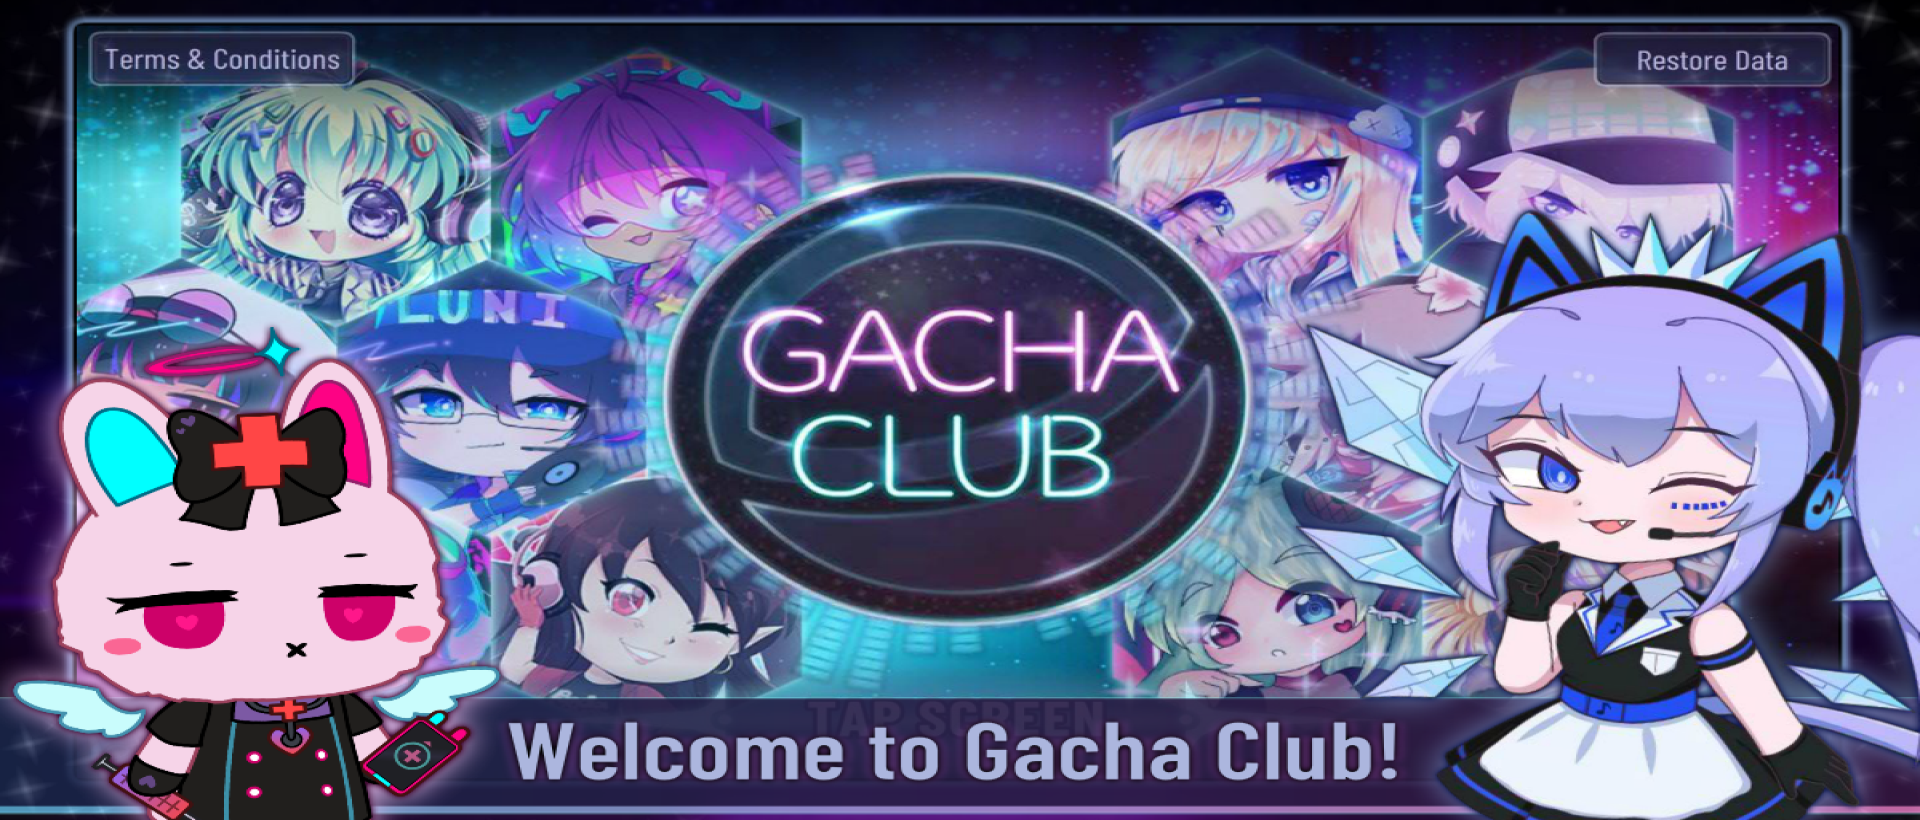 Download Gacha Club on PC with NoxPlayerAppcenter